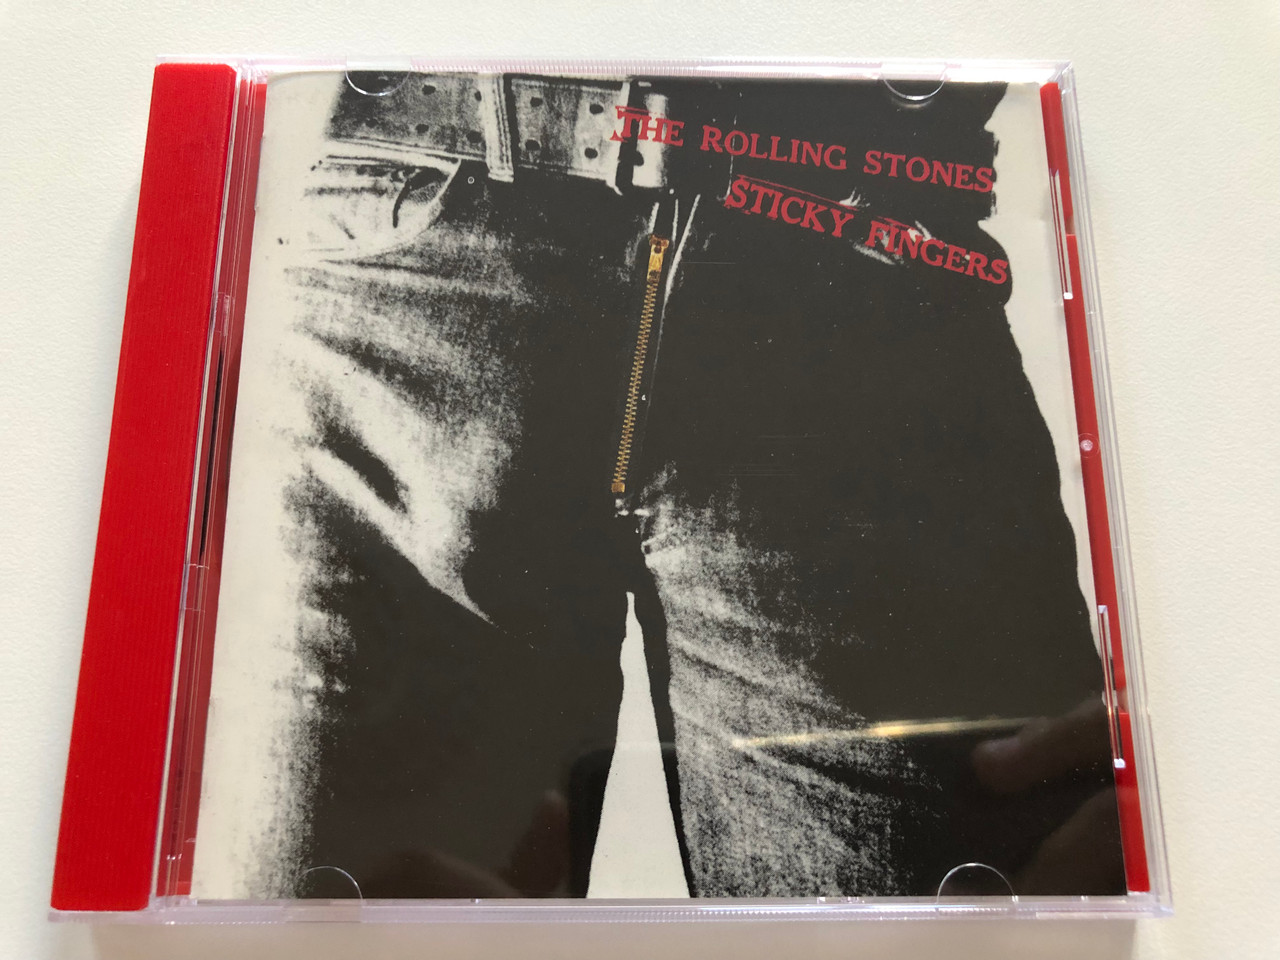 https://cdn10.bigcommerce.com/s-62bdpkt7pb/products/31167/images/183477/The_Rolling_Stones_Sticky_Fingers_Rolling_Stones_Records_Audio_CD_Stereo_CBS_450195_2_1__88516.1625591148.1280.1280.JPG?c=2